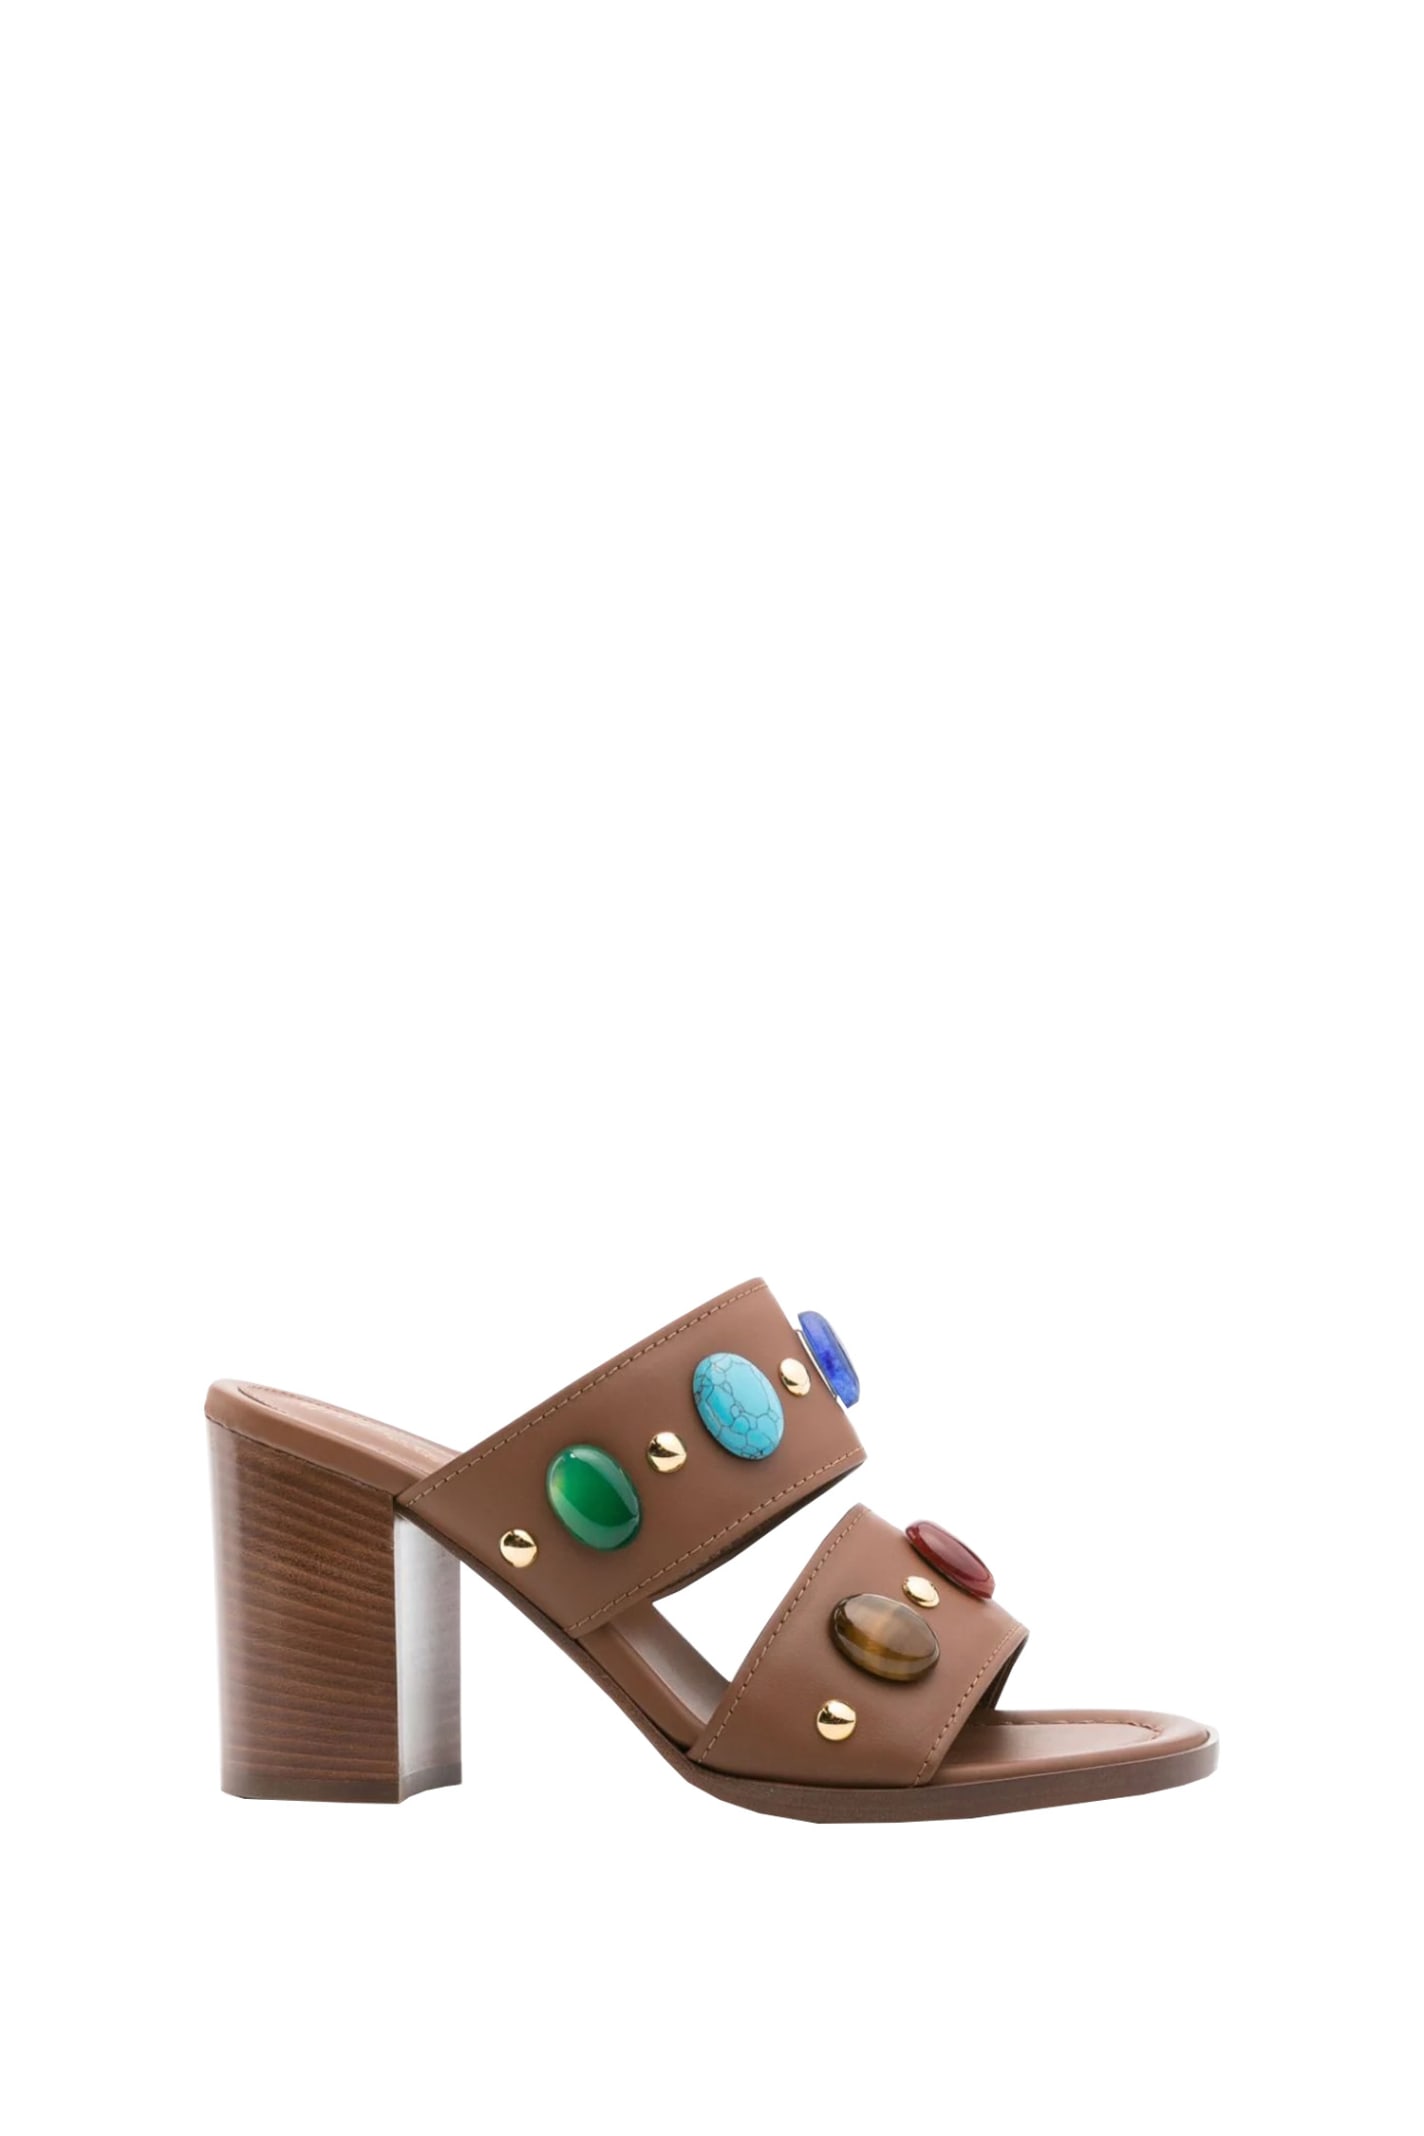 Shop Gianvito Rossi Shoes With Heel In Brown